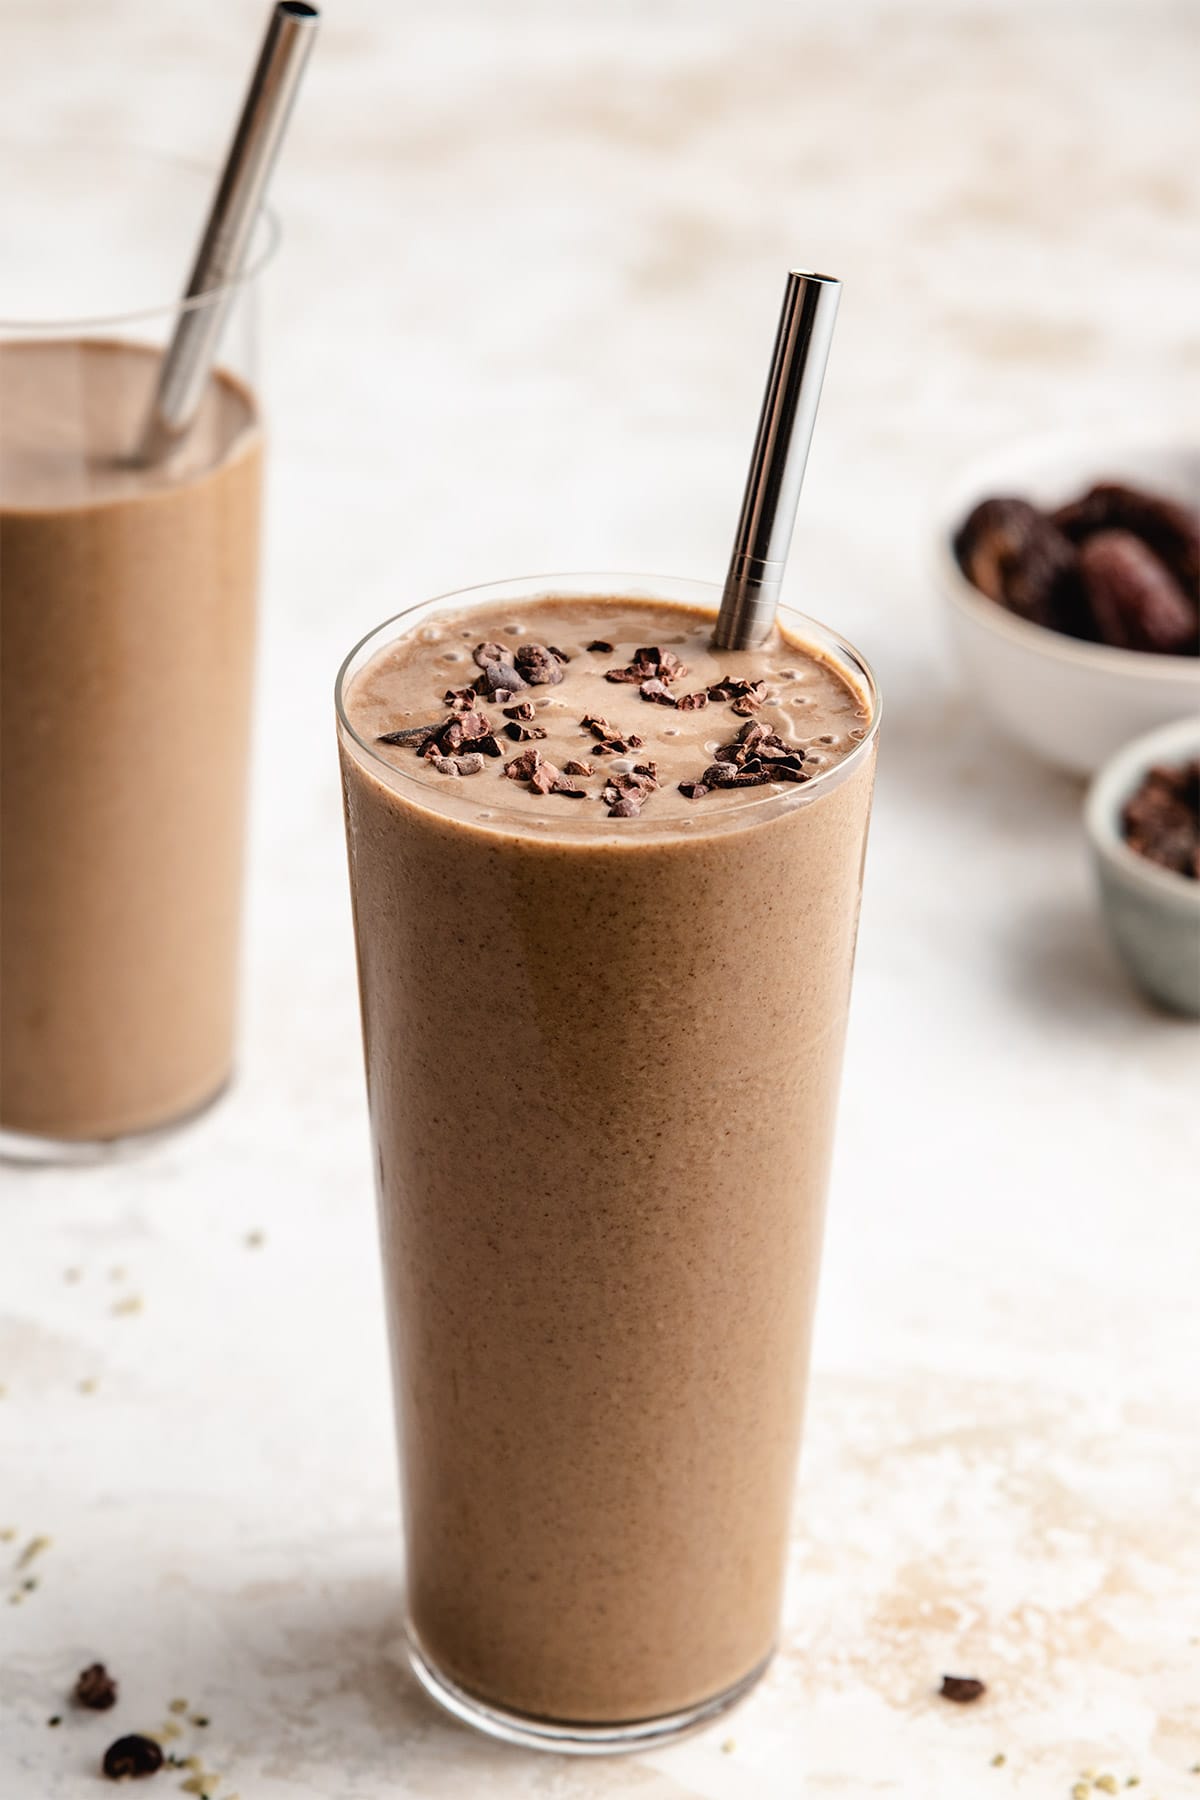 A coffee protein smoothie garnished with cacao nibs in a tall clear glass with a silver straw.